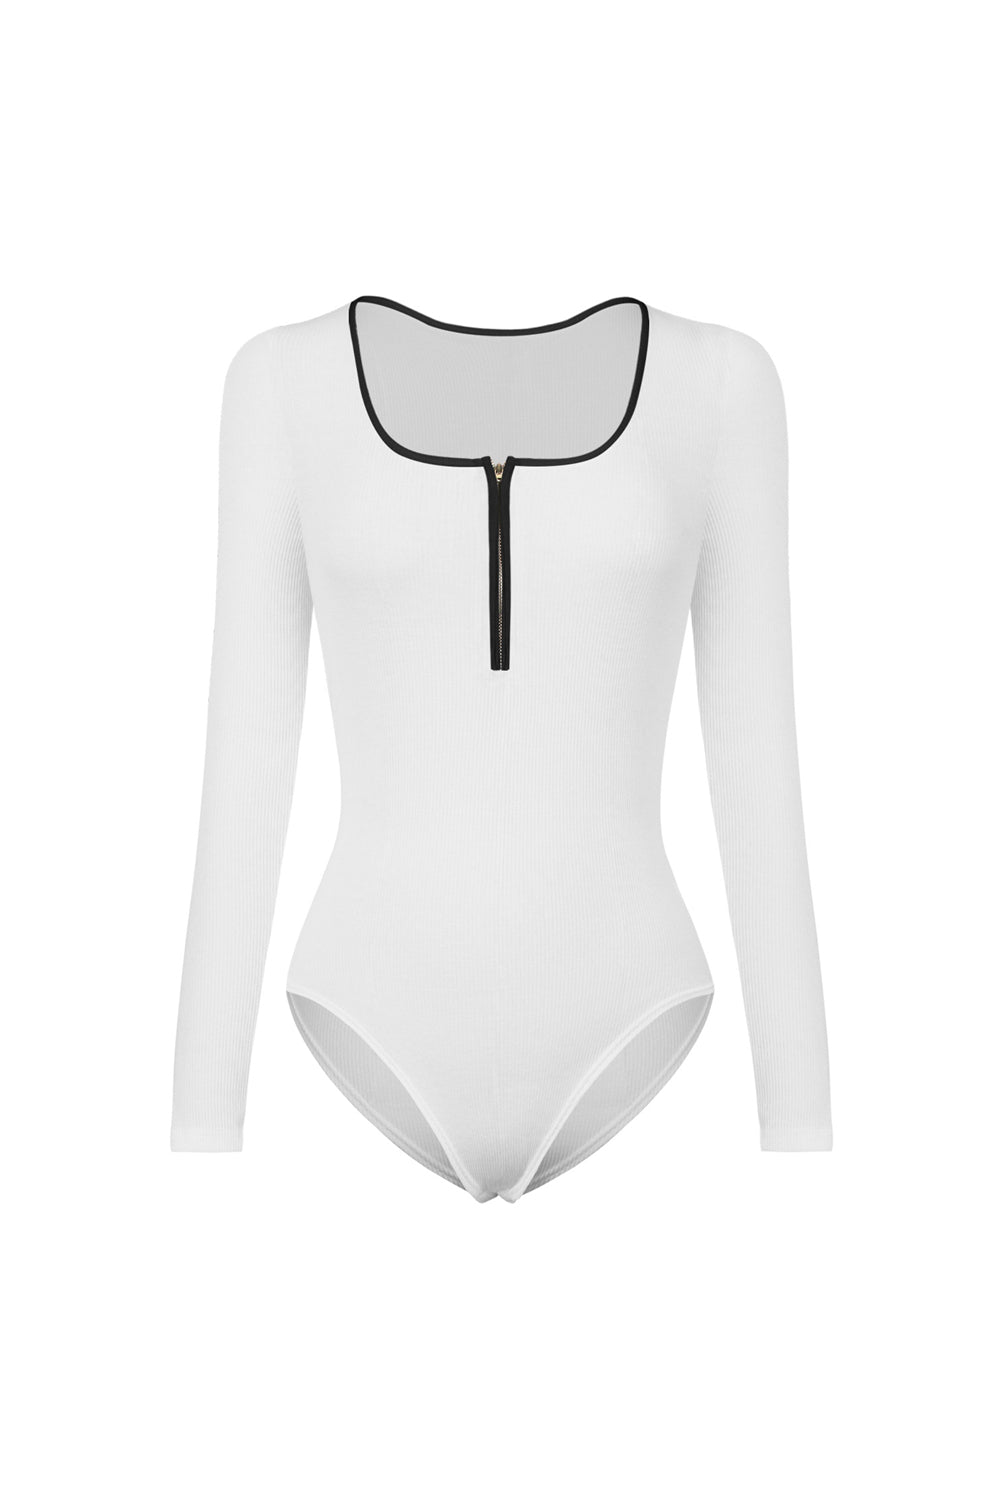 Enchantress' Ribbed Bodysuit - Embrace the Ethereal Beauty and Captivate Hearts with Confidence - Guy Christopher